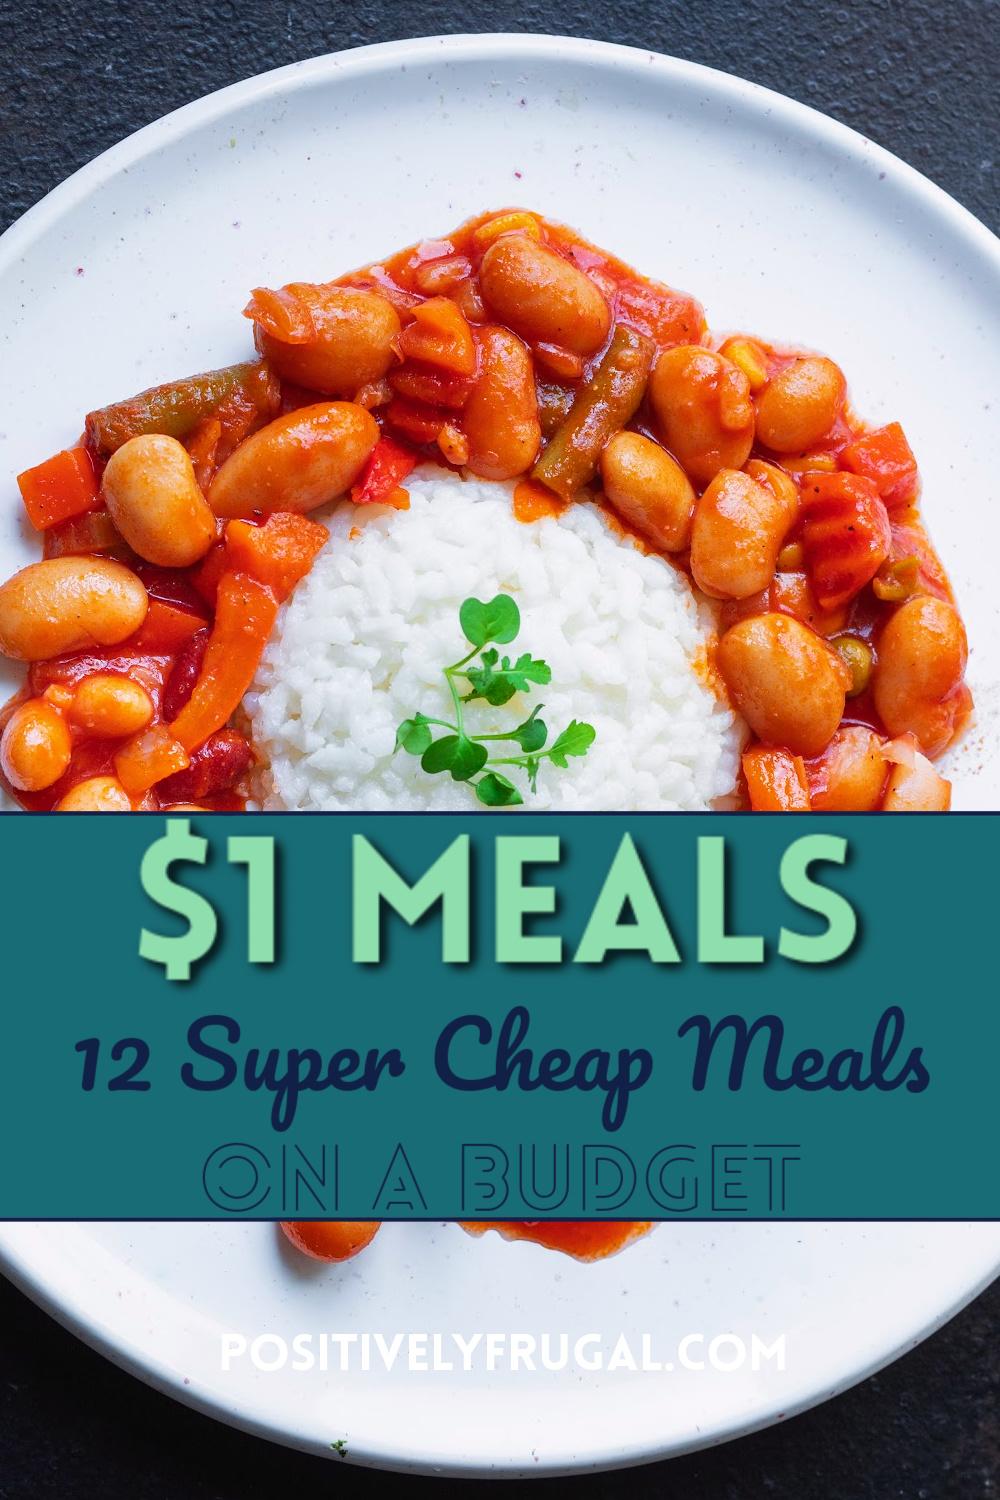 One Dollar Meals 12 Cheap Meals on a Budget by PositivelyFrugal.com